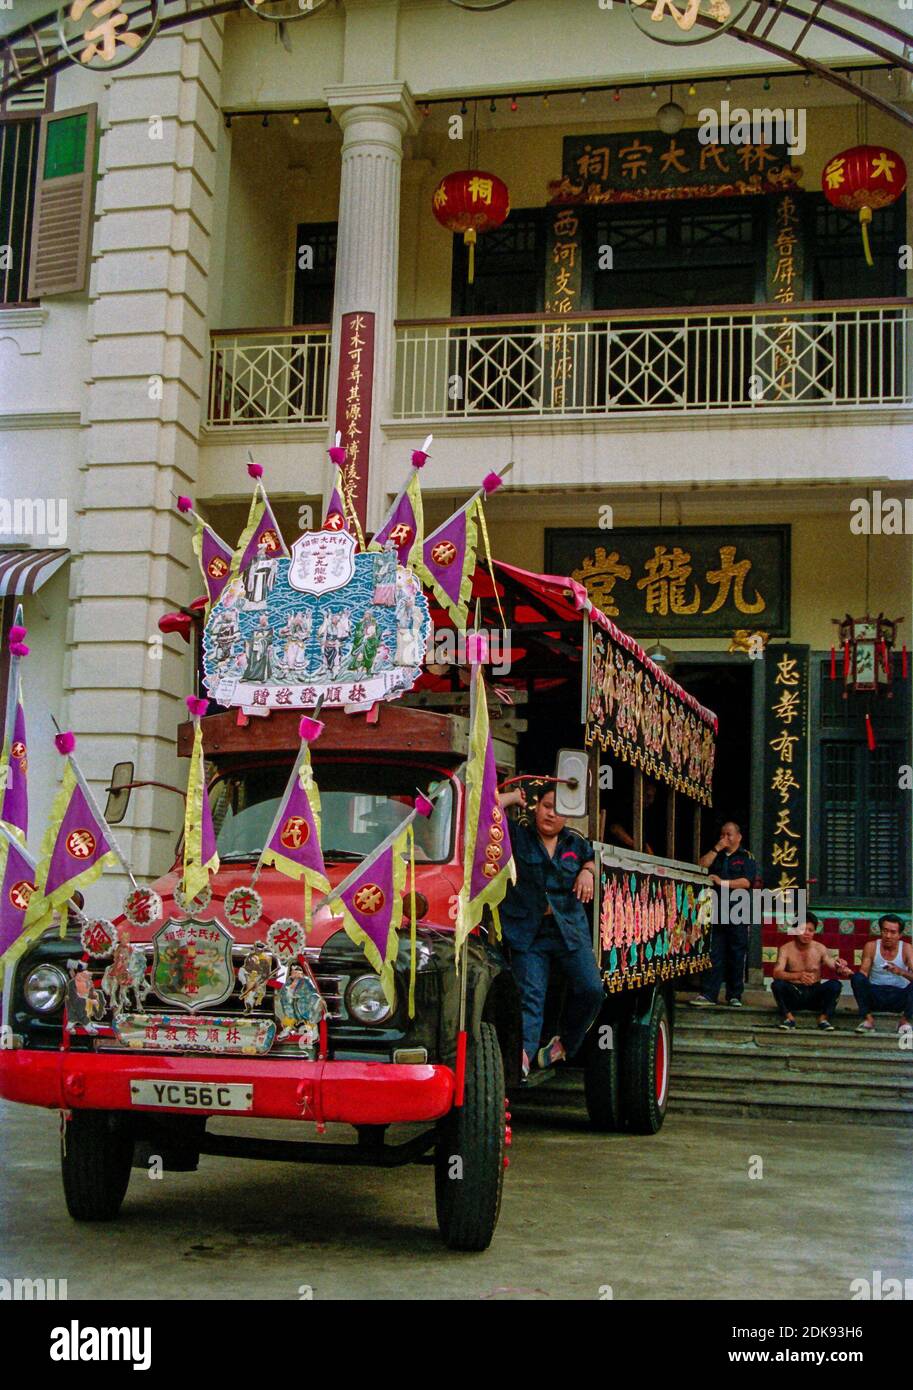 Traditional Chinese funeral hearse on New Bridge Road in Chinatown, Singapore Stock Photo